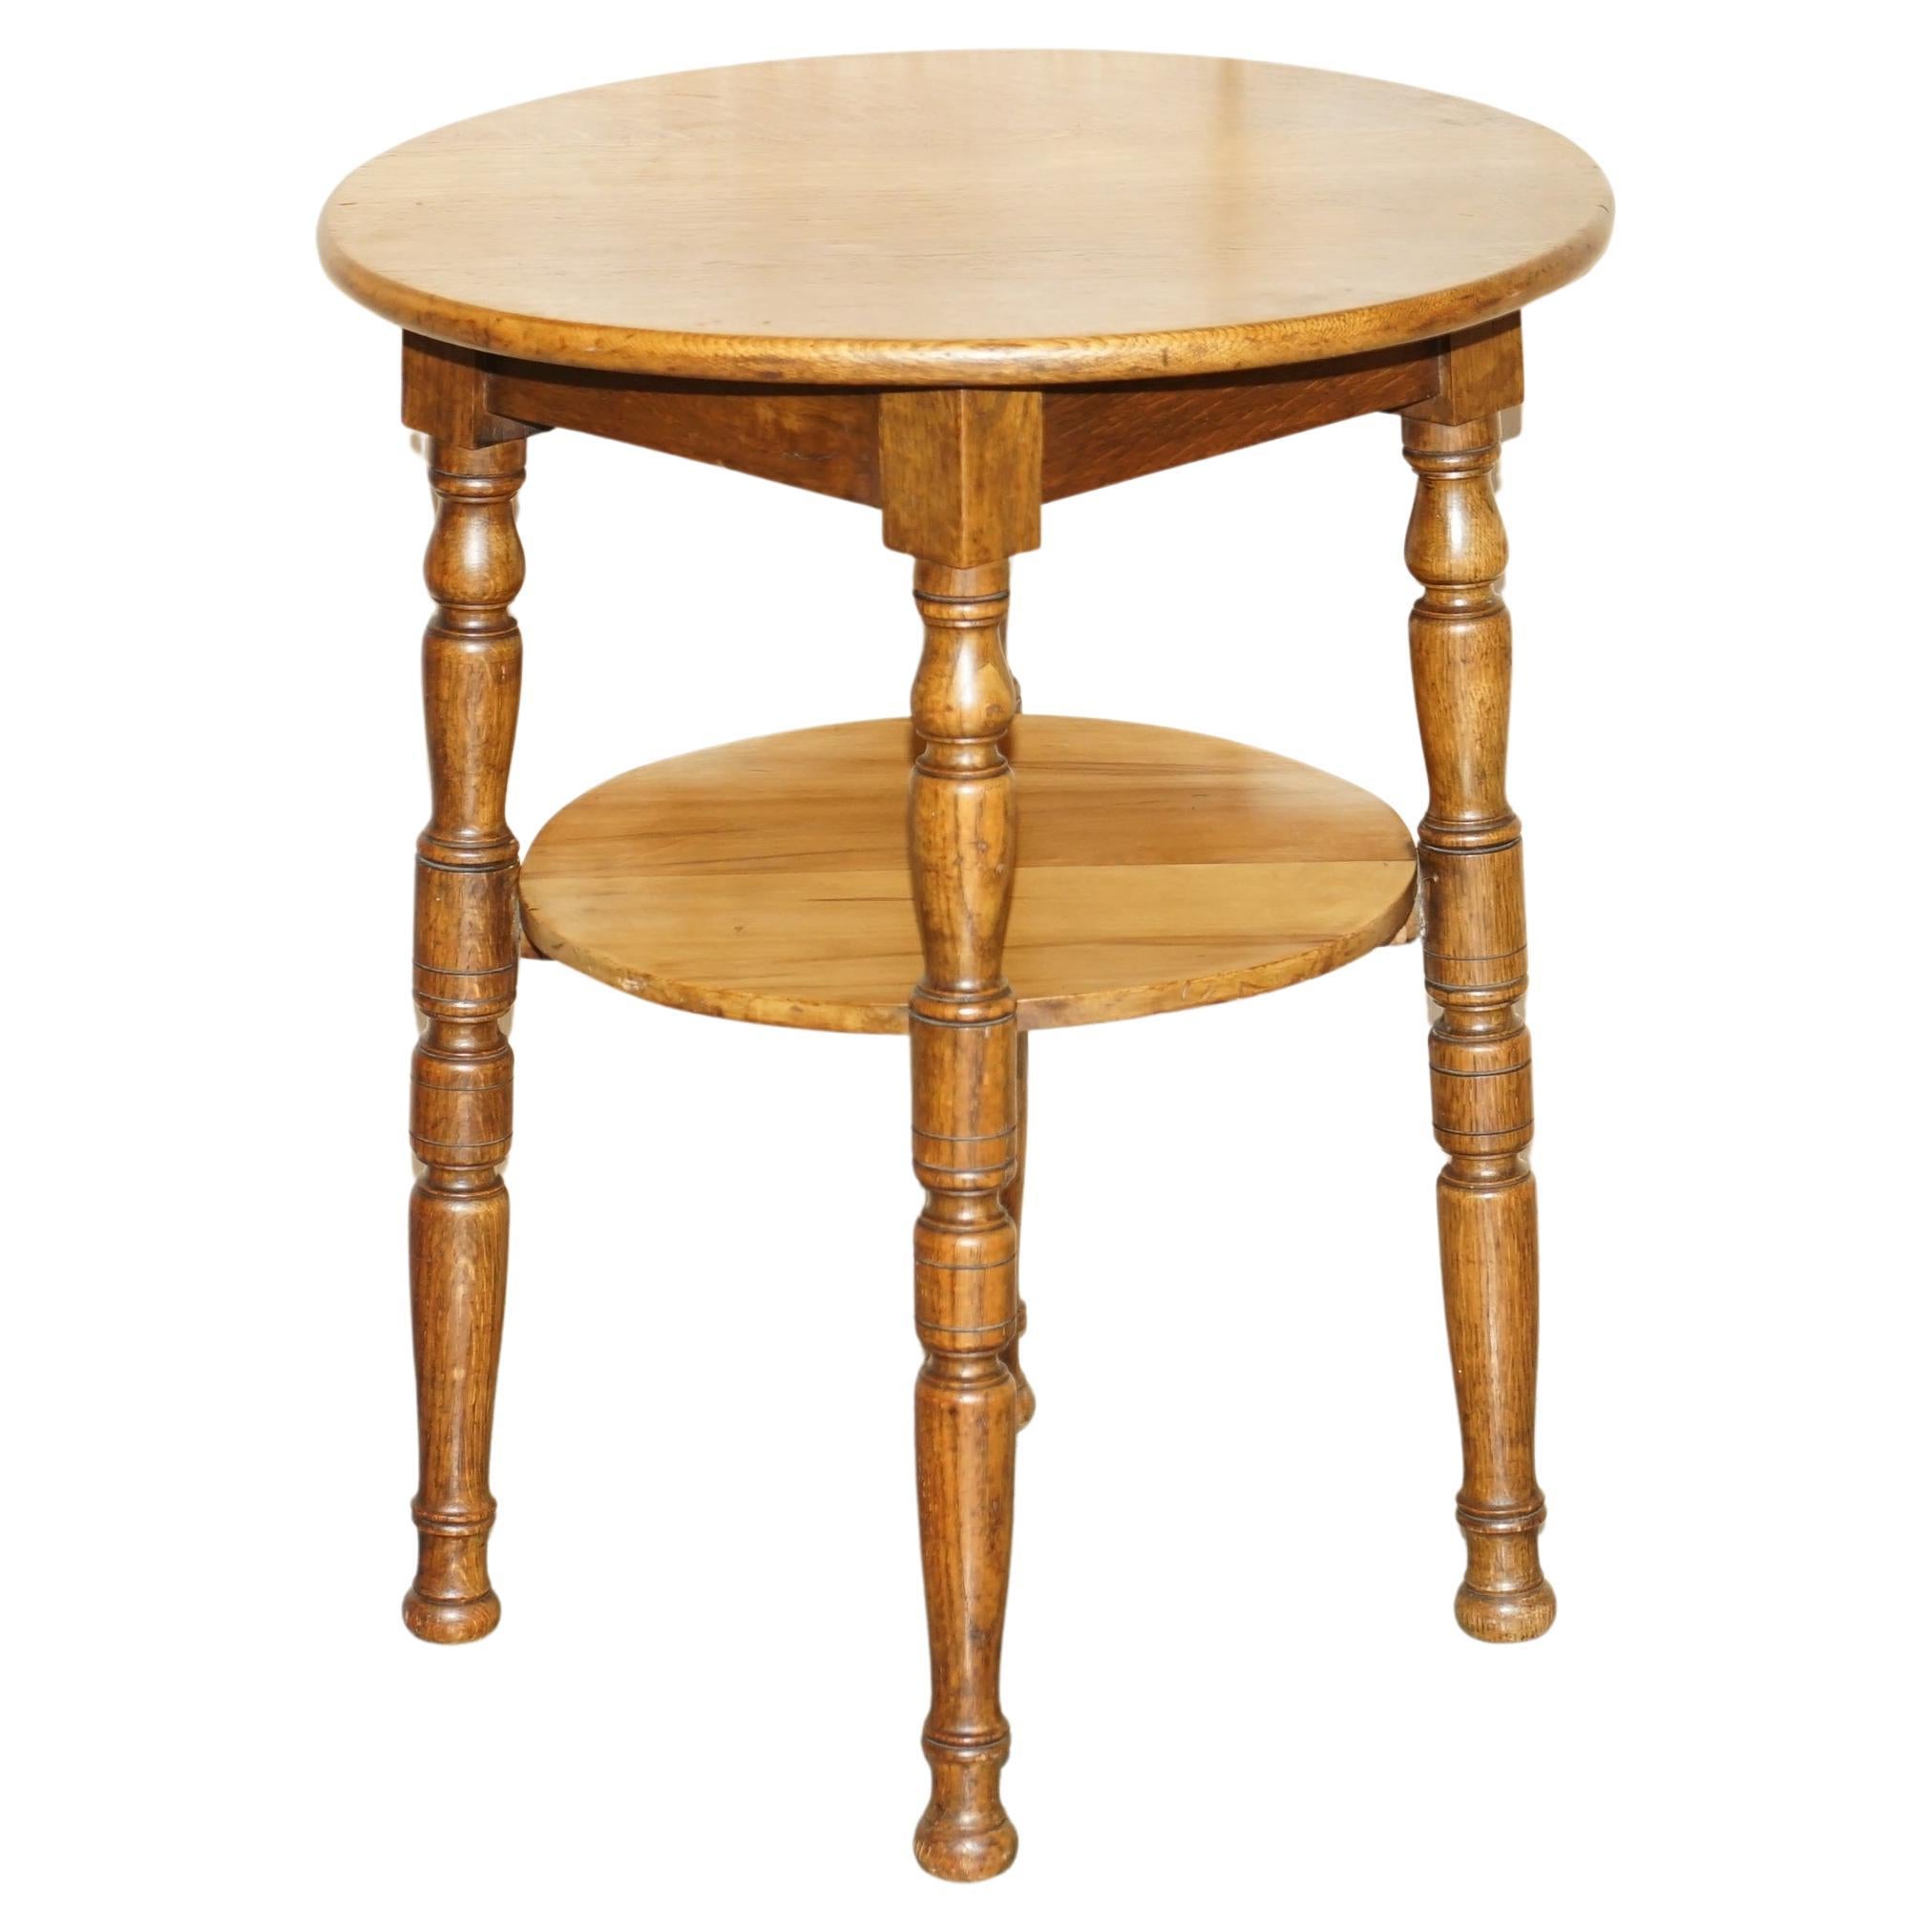 Lovely circa 1900 English Oak Side Table with Turned Legs and a Nice Rich Patina For Sale